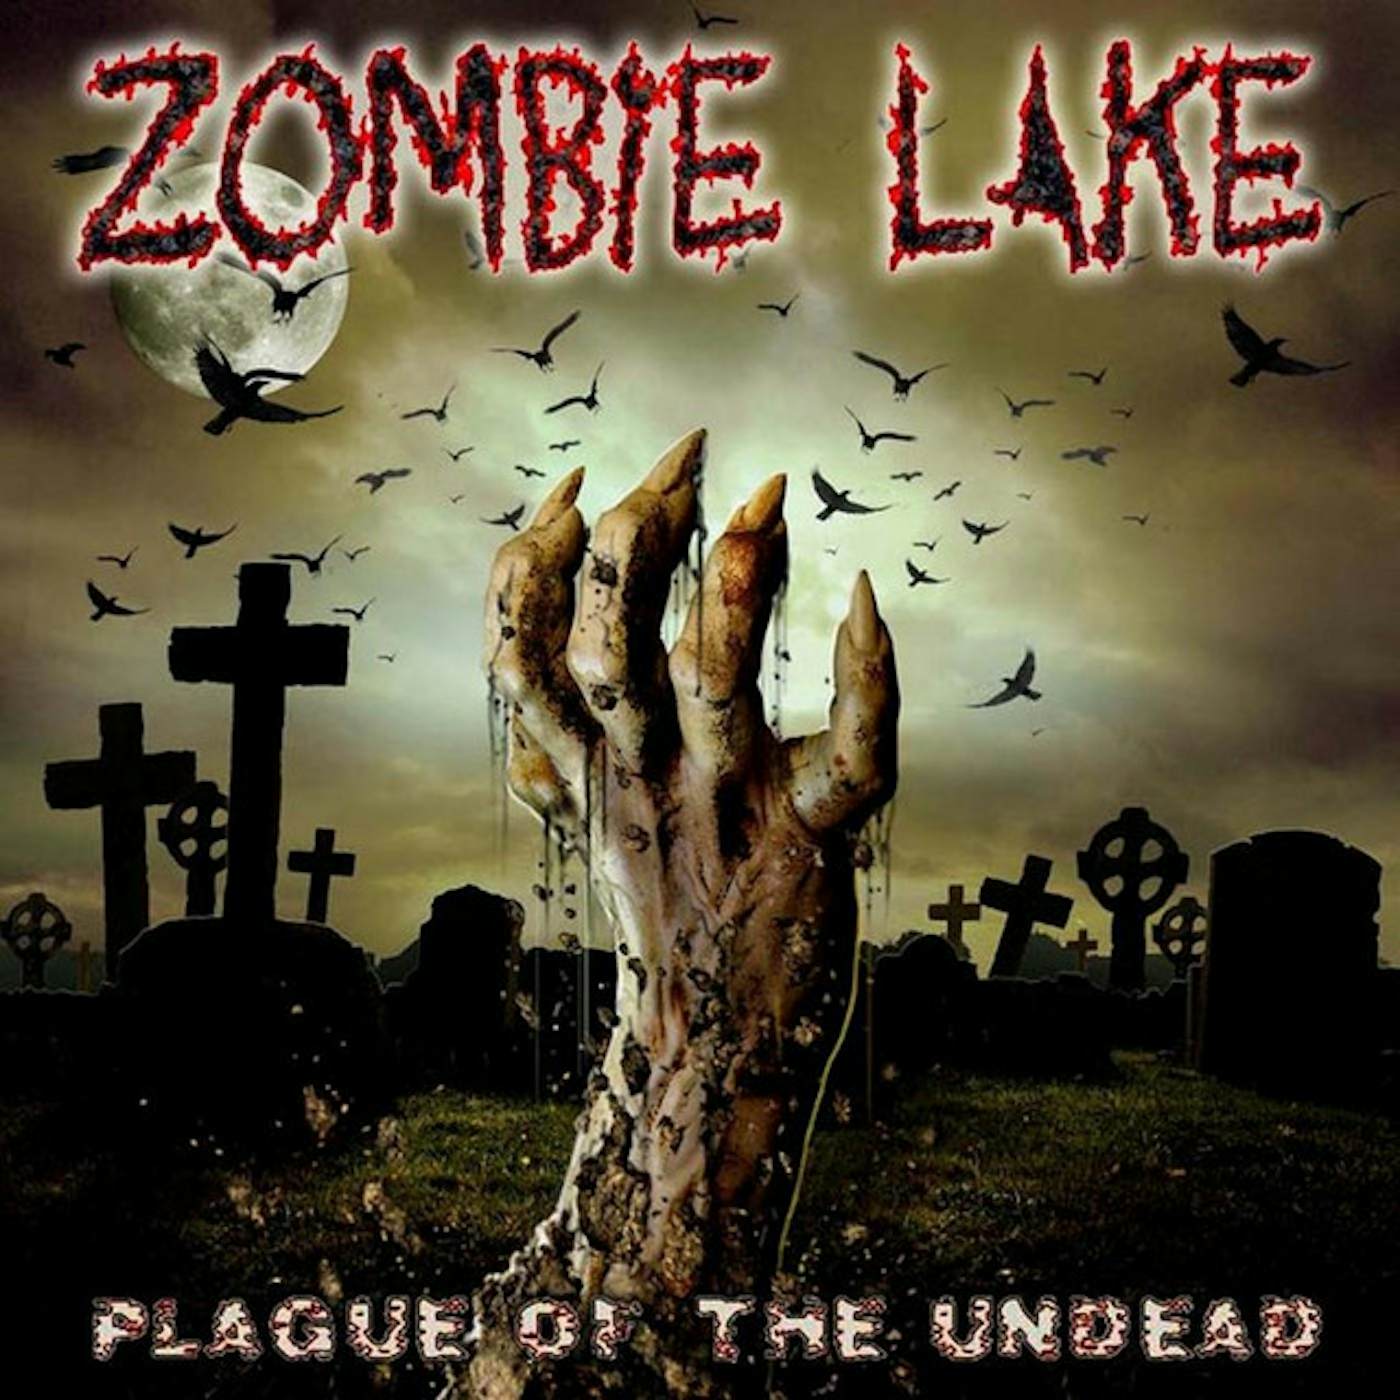 Zombie Lake PLAGUE OF THE UNDEAD-L Vinyl Record